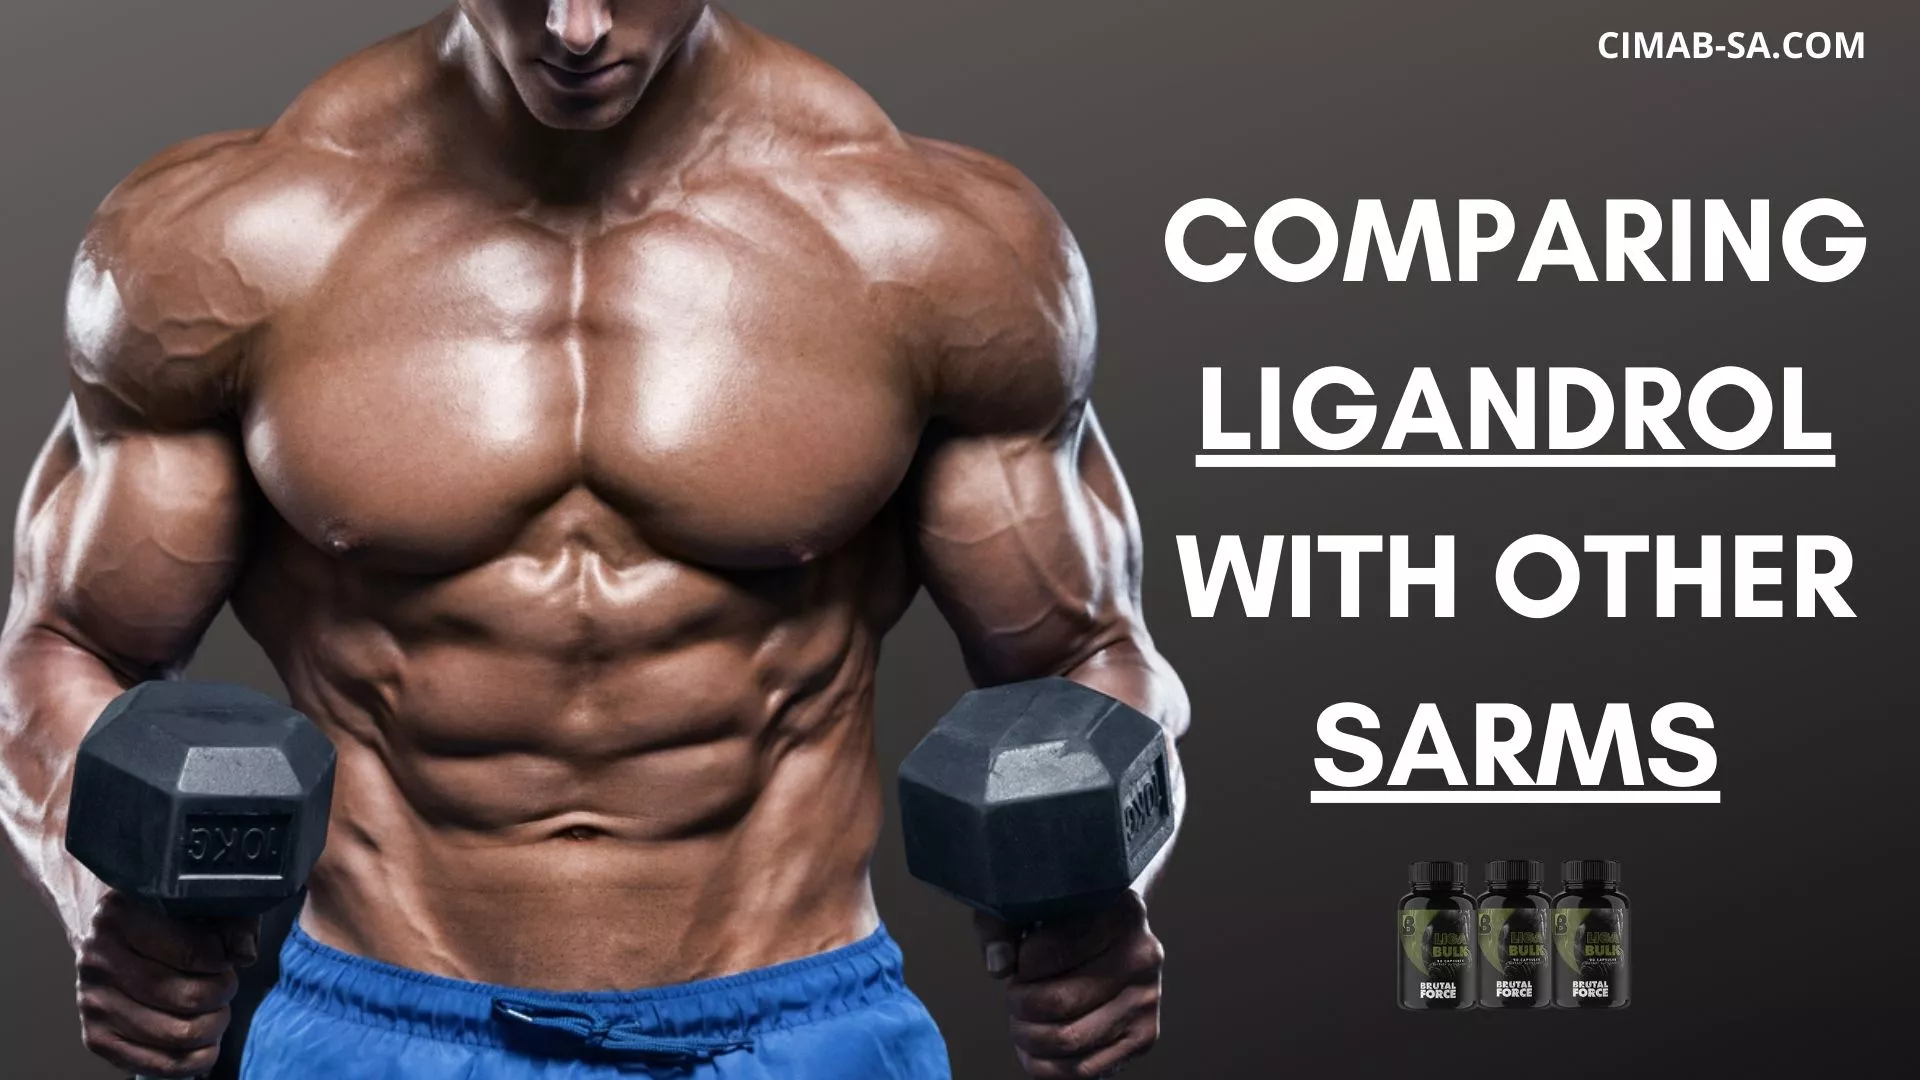 Comparing Ligandrol with other SARMS